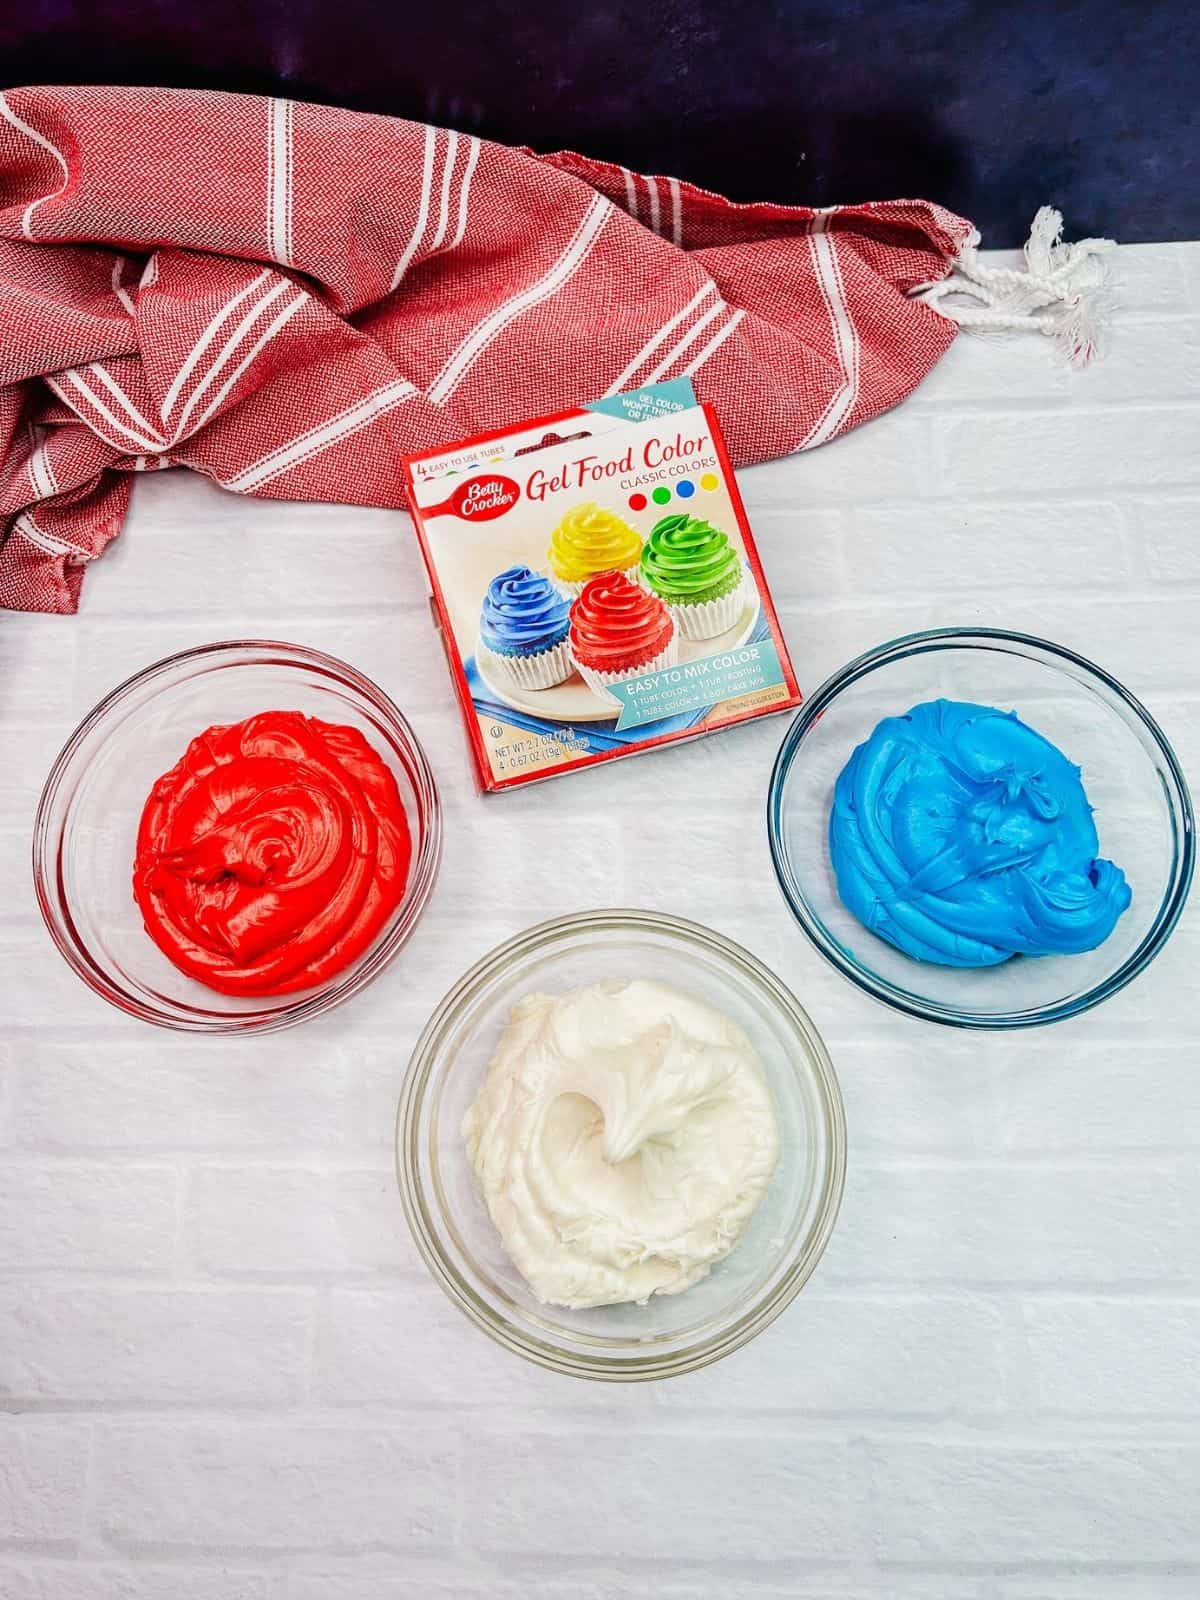 red, white and blue frosting in bowls.